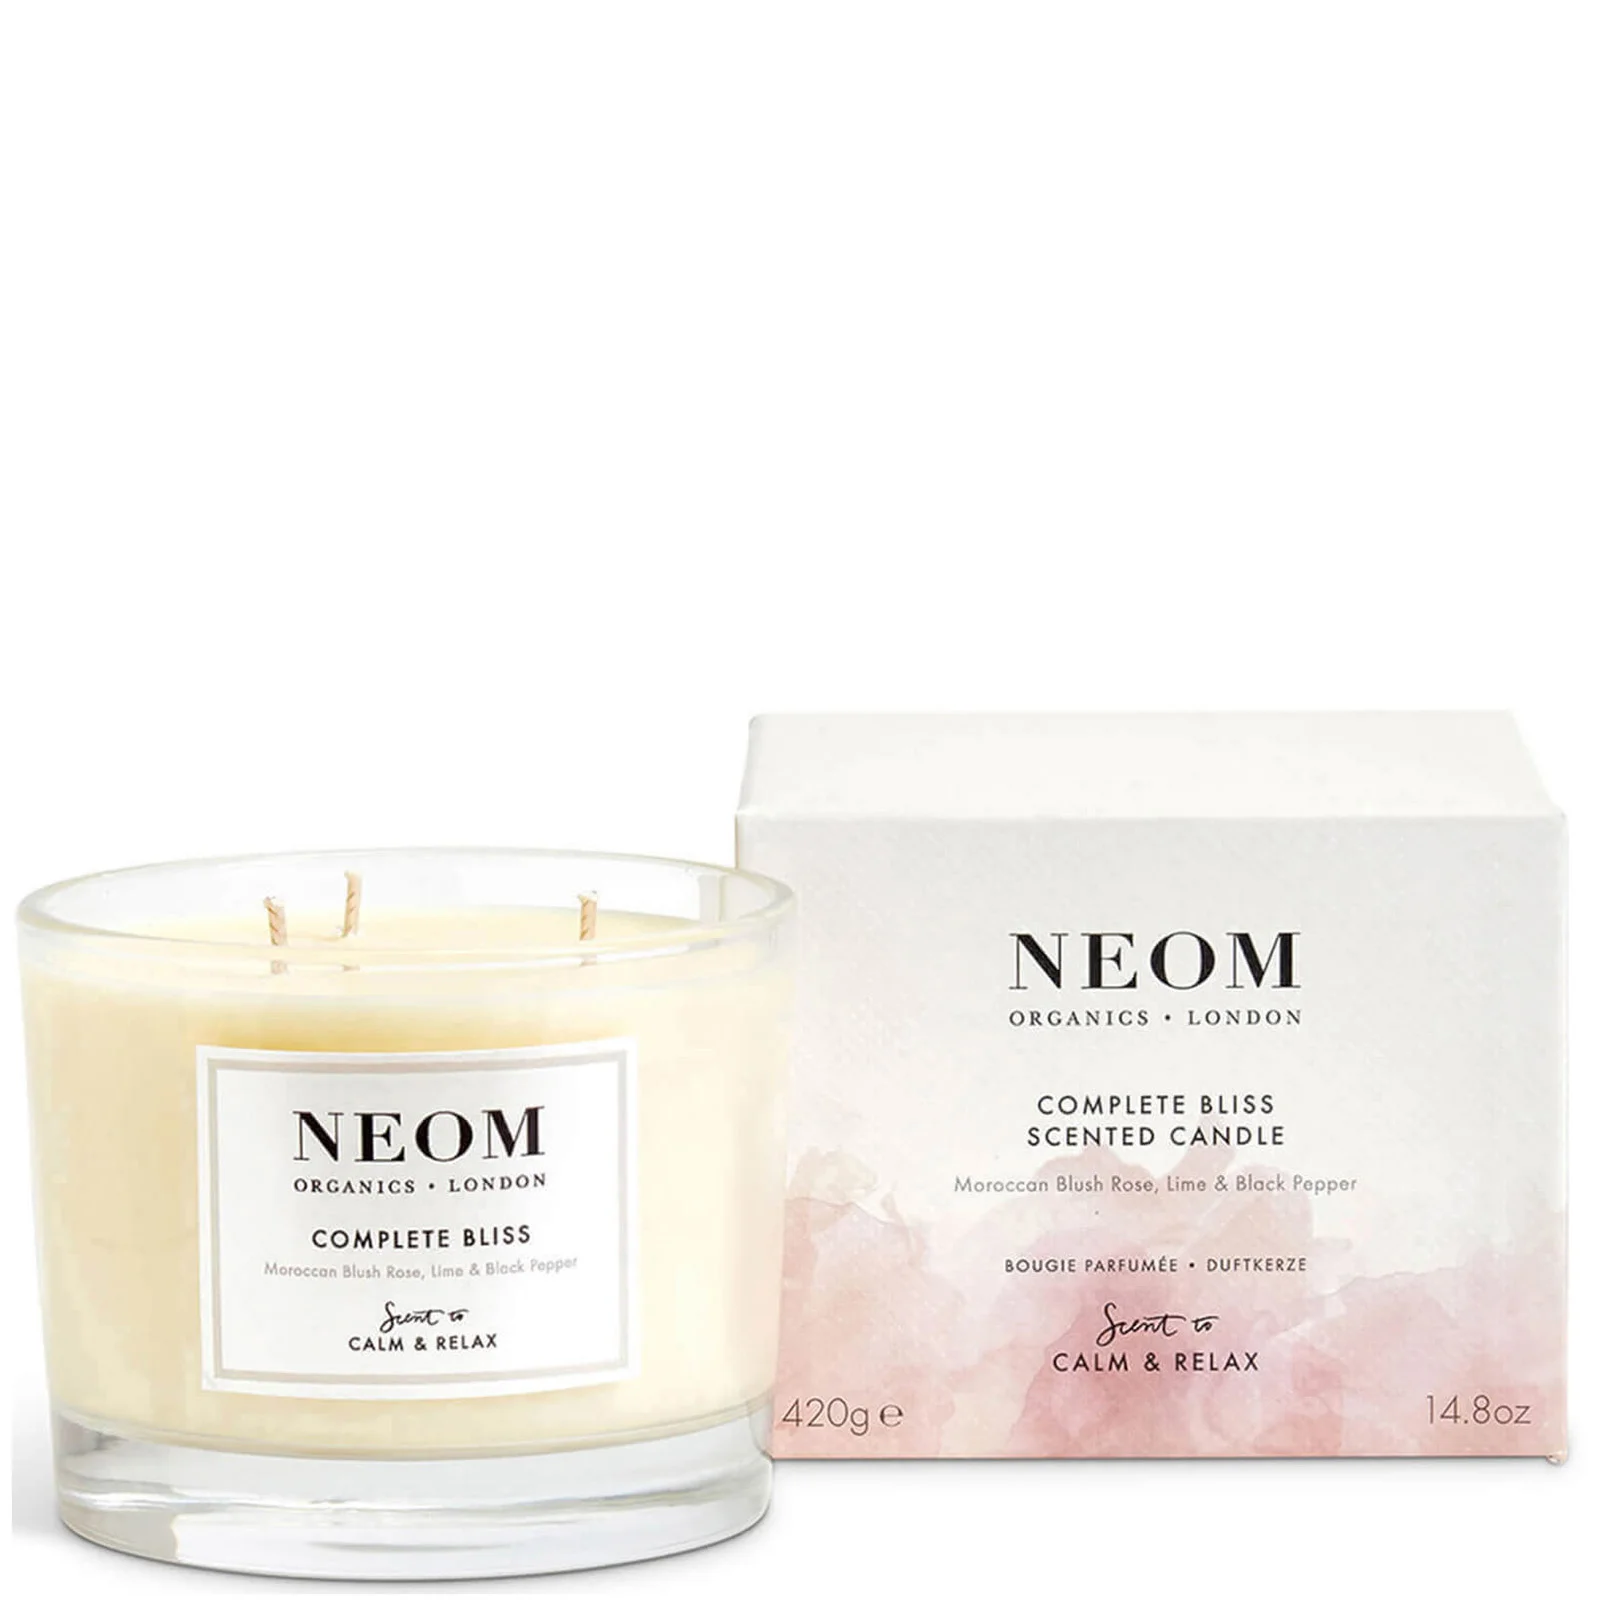 NEOM Organics Complete Bliss Luxury Scented Candle Image 1